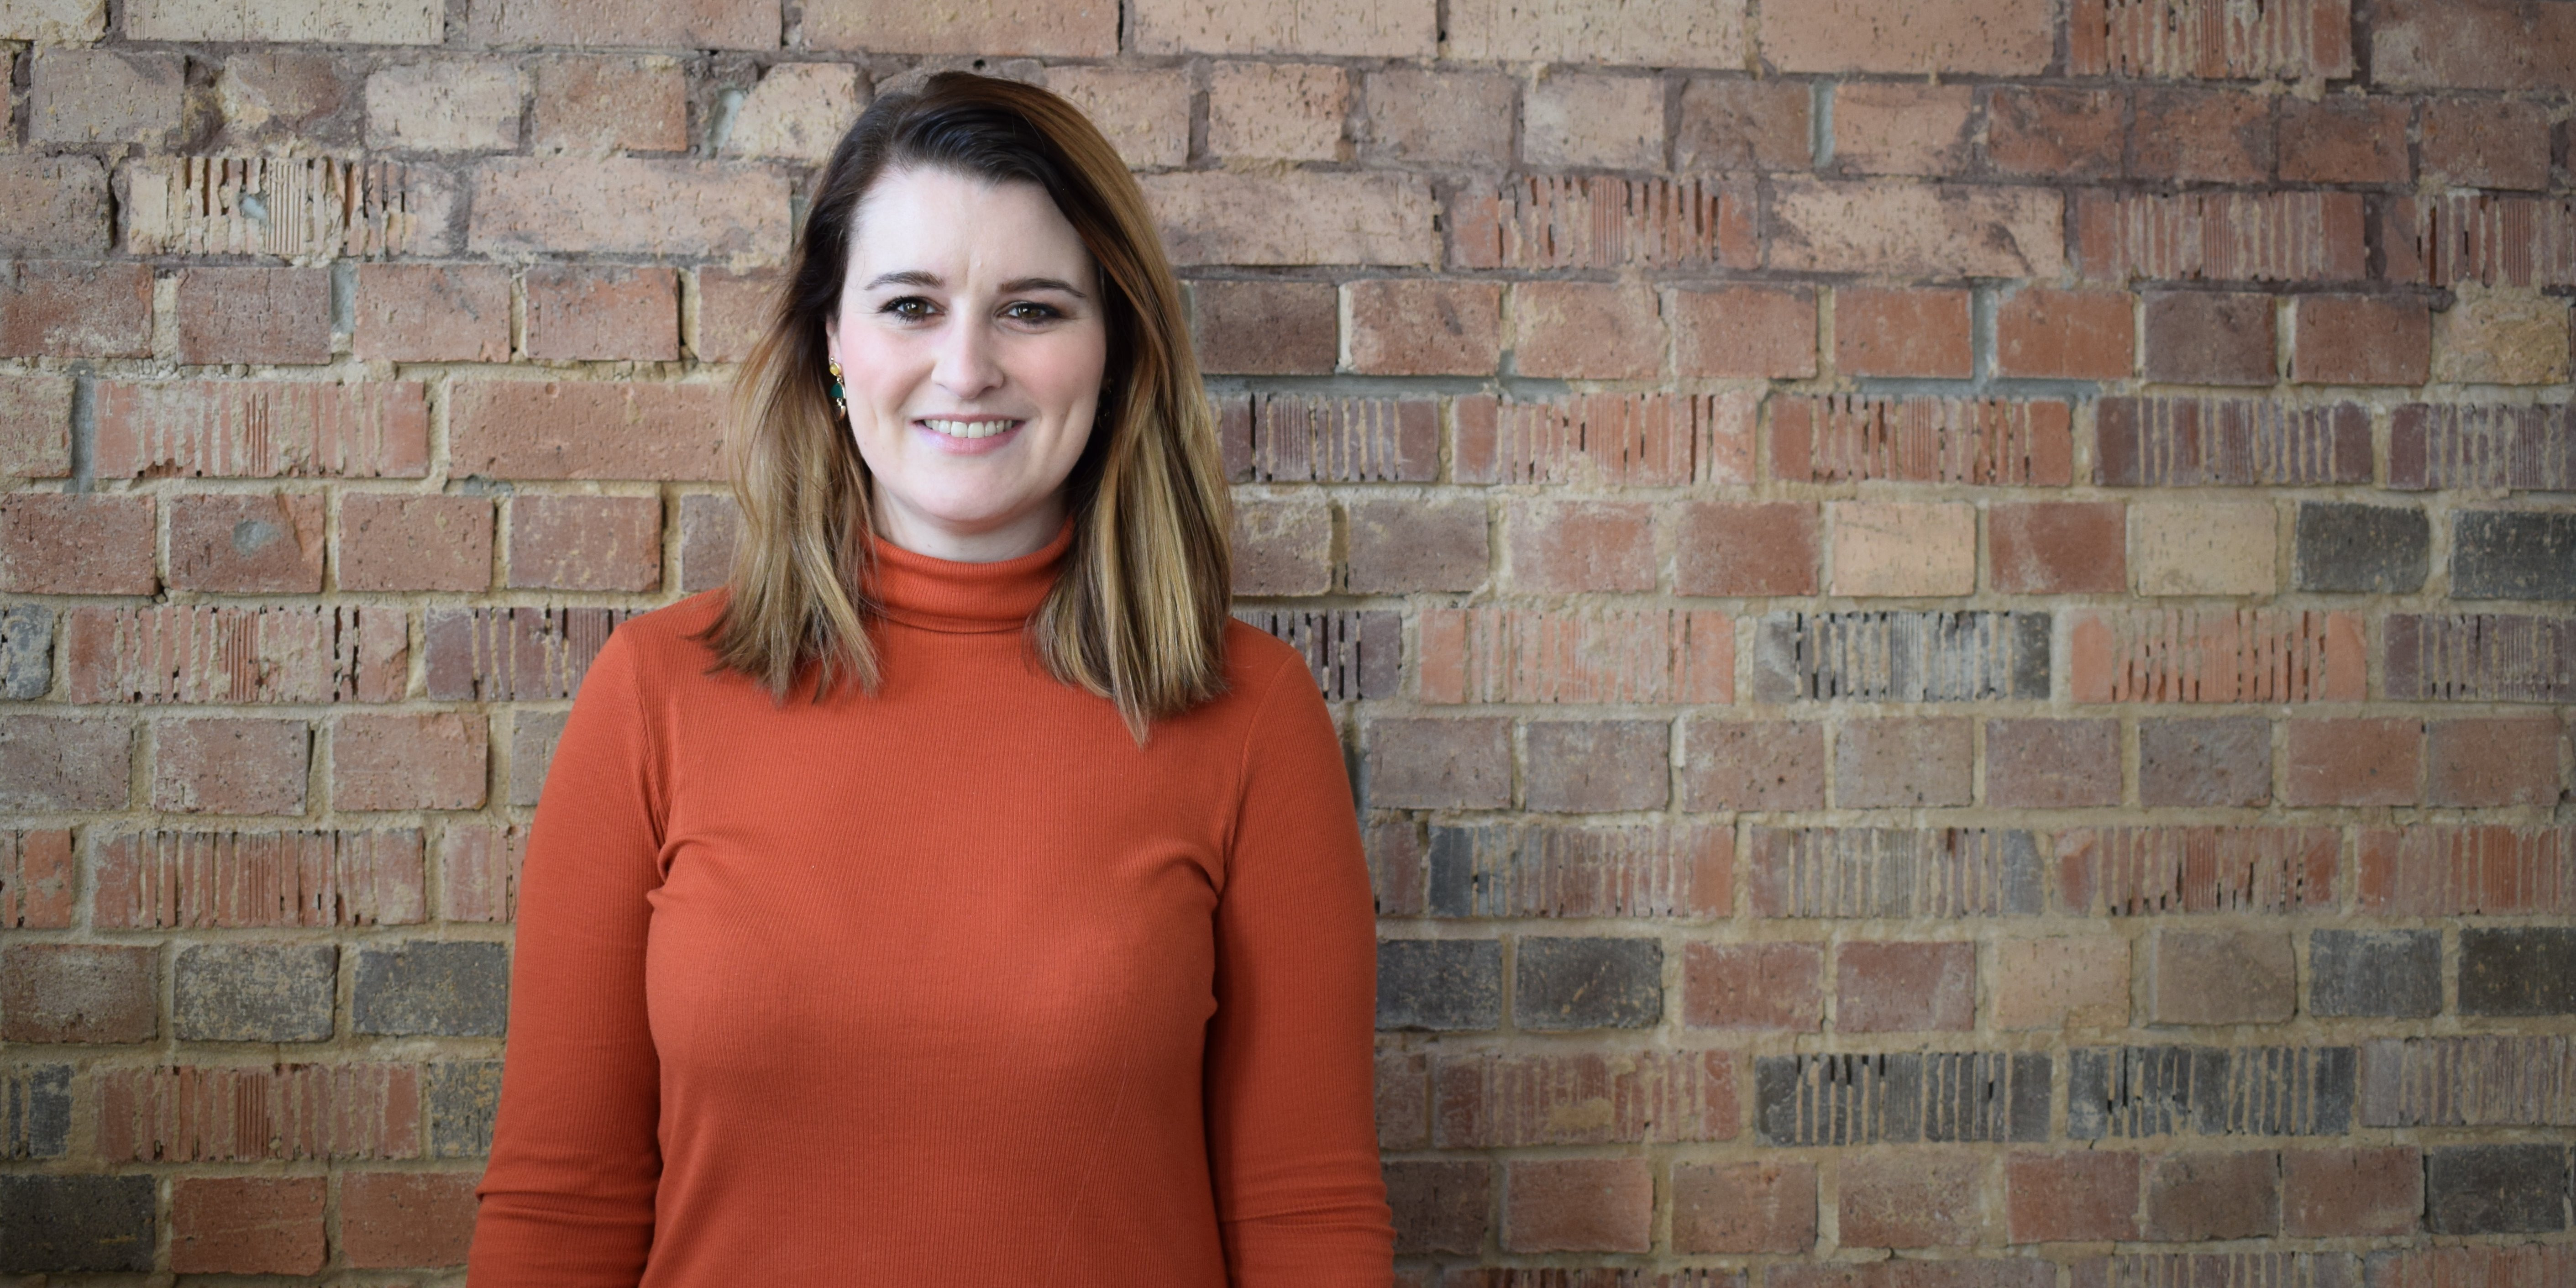 Meet Jade, our latest Cooper Project interviewee